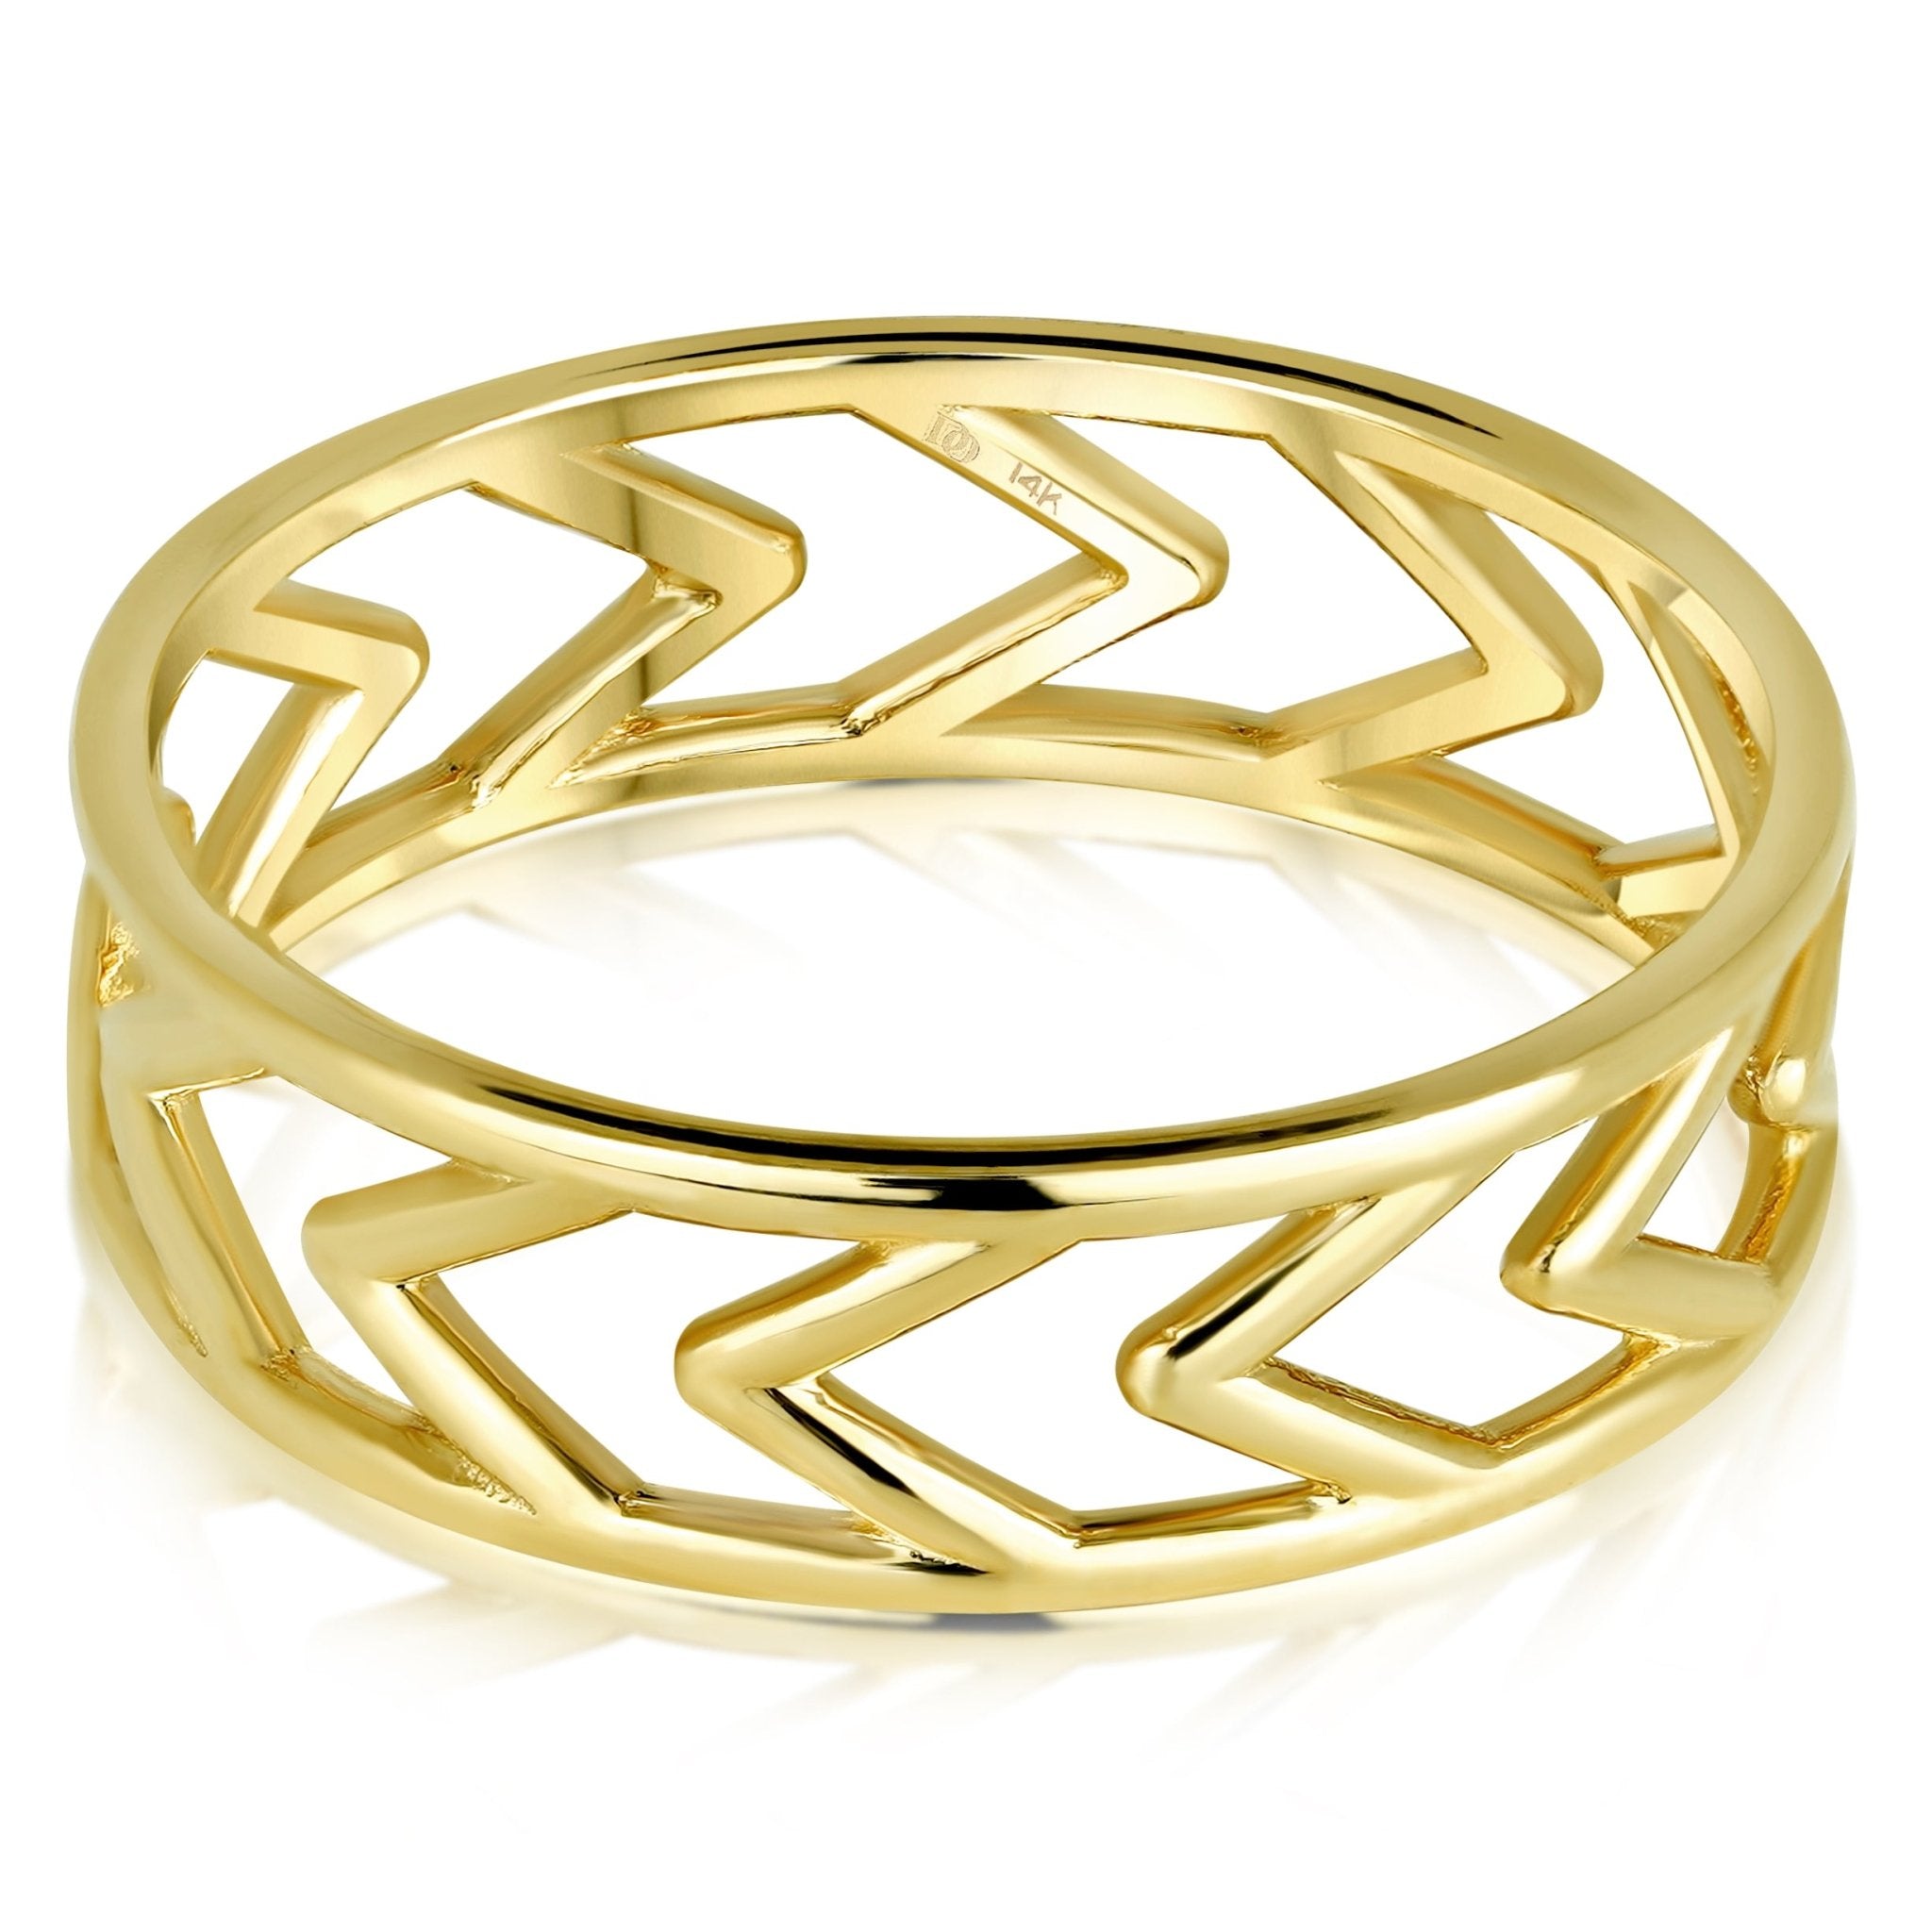 3 Strand Hammered Chevron Ring in Gold Filled | Street Bauble